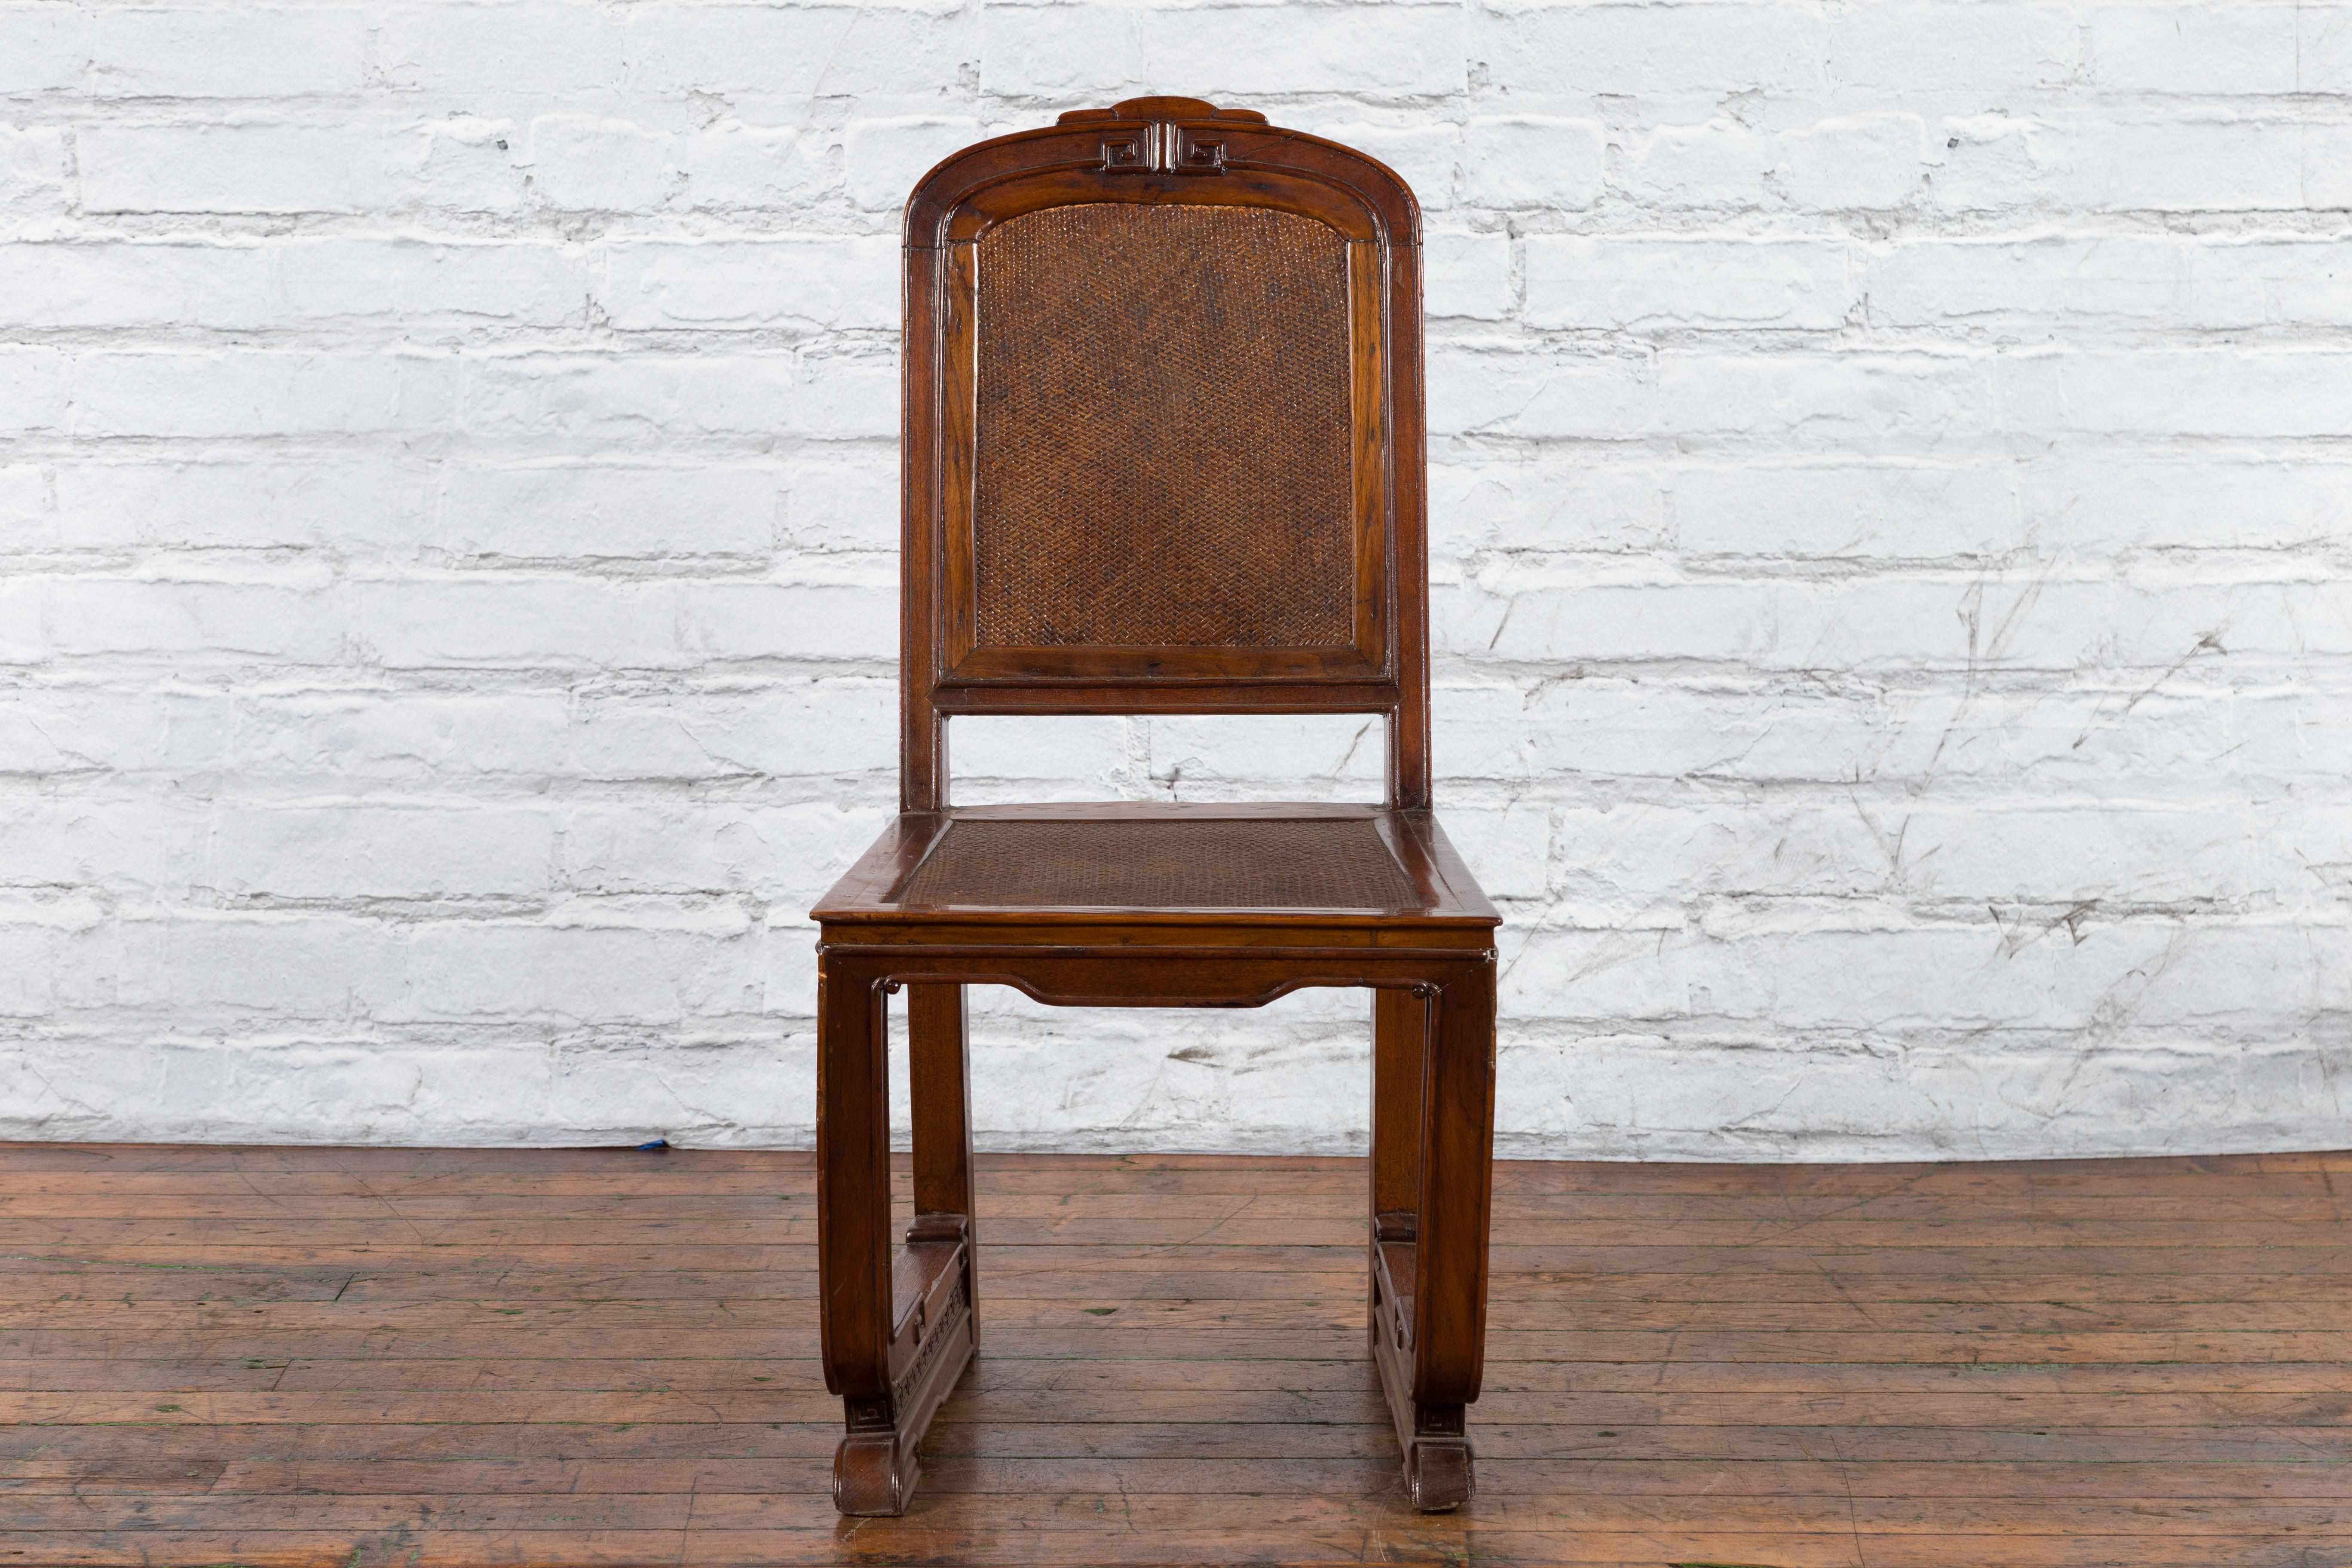 Chinese Qing Dynasty Period 19th Century Wooden Side Chair with Rattan Accents For Sale 1